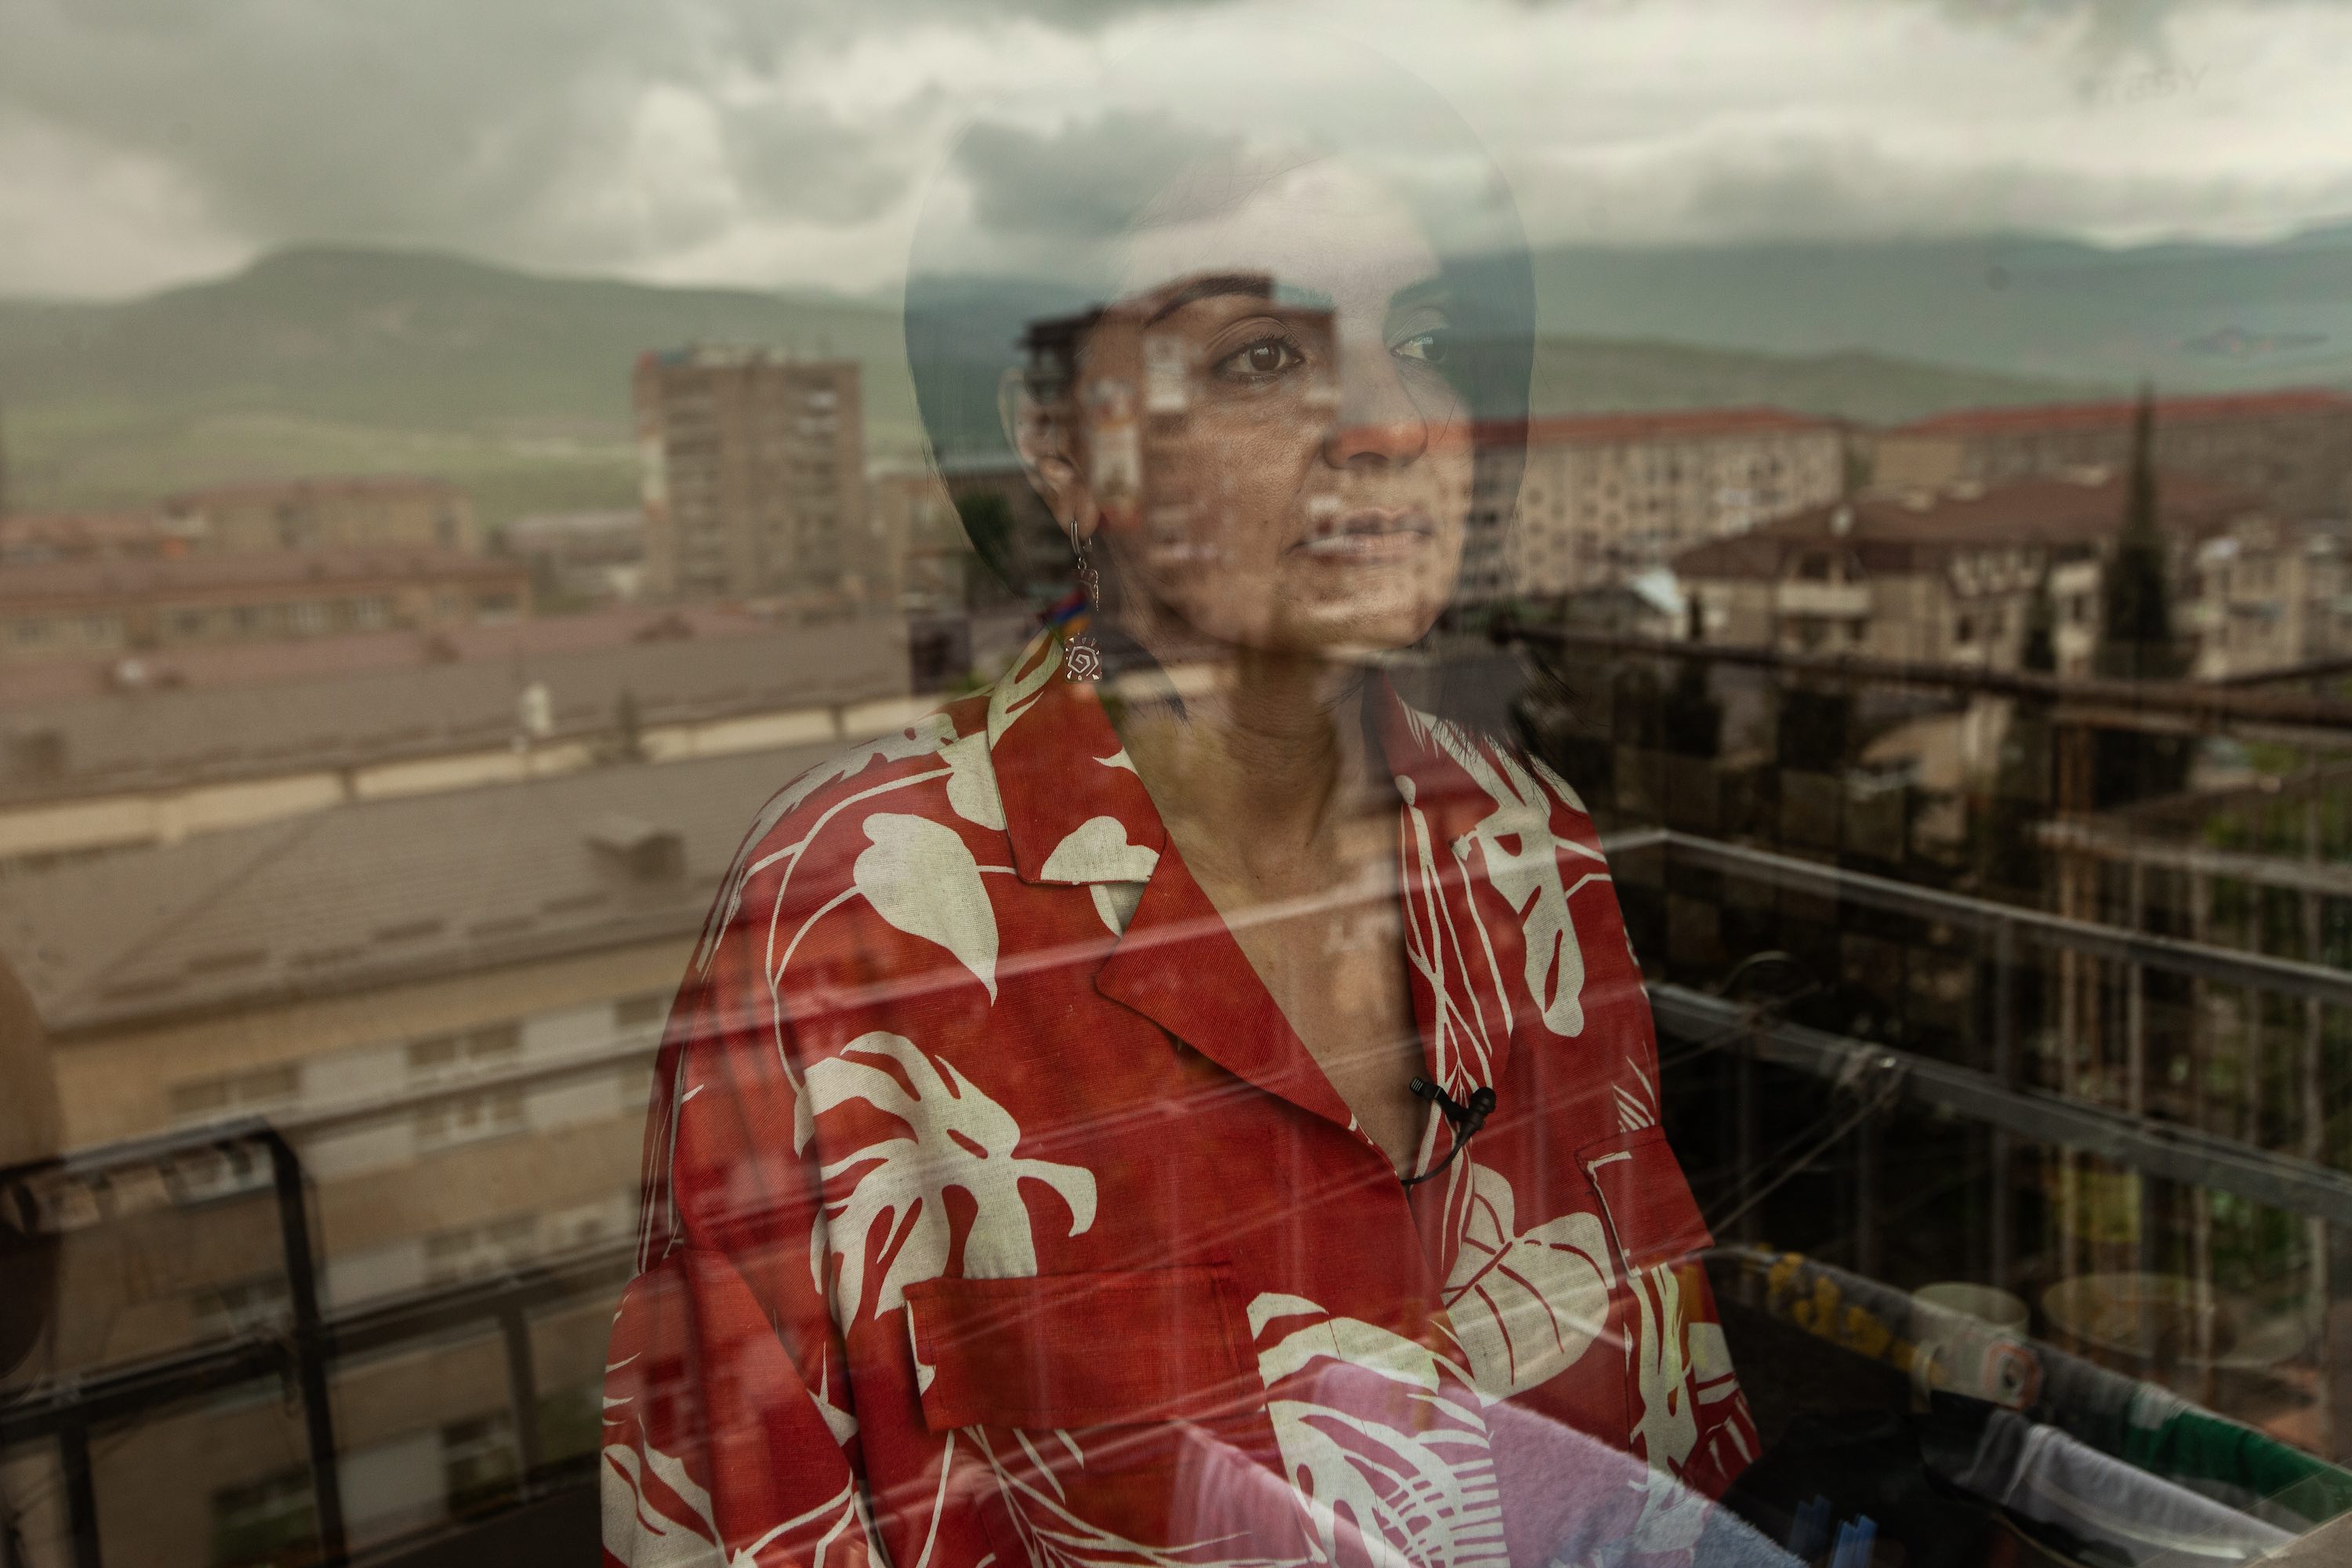 A woman wearing a patterned red shirt stands in a window, which shows a reflection of a rugged mountainous landscape.